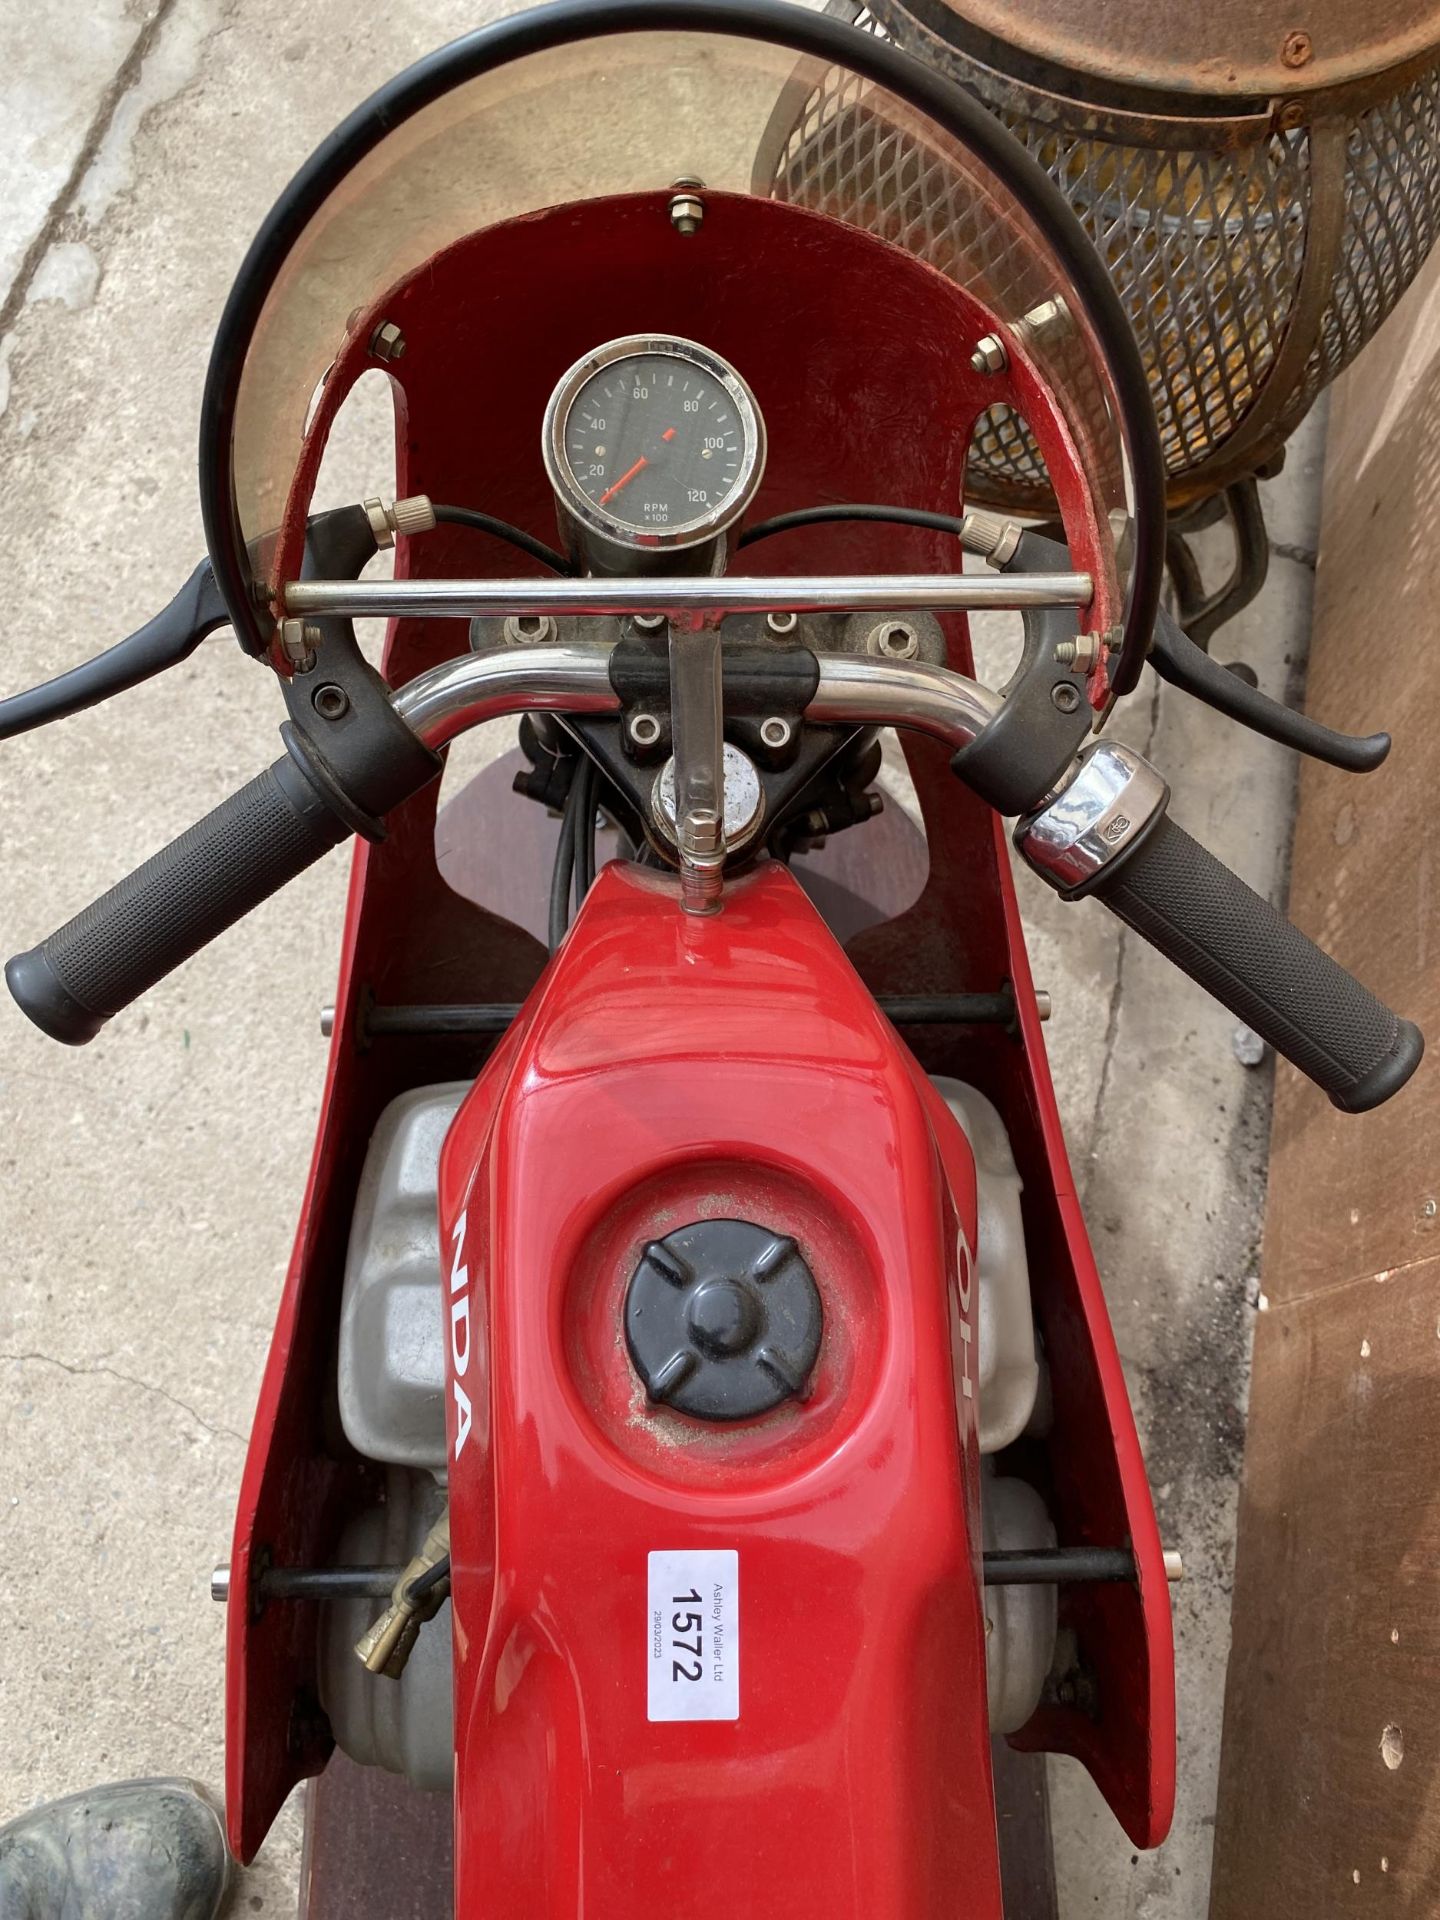 A HONDA RC166 MODEL FAIRGROUND RIDE MOUNTED ON A WOODEN PLINTH - Image 6 of 6